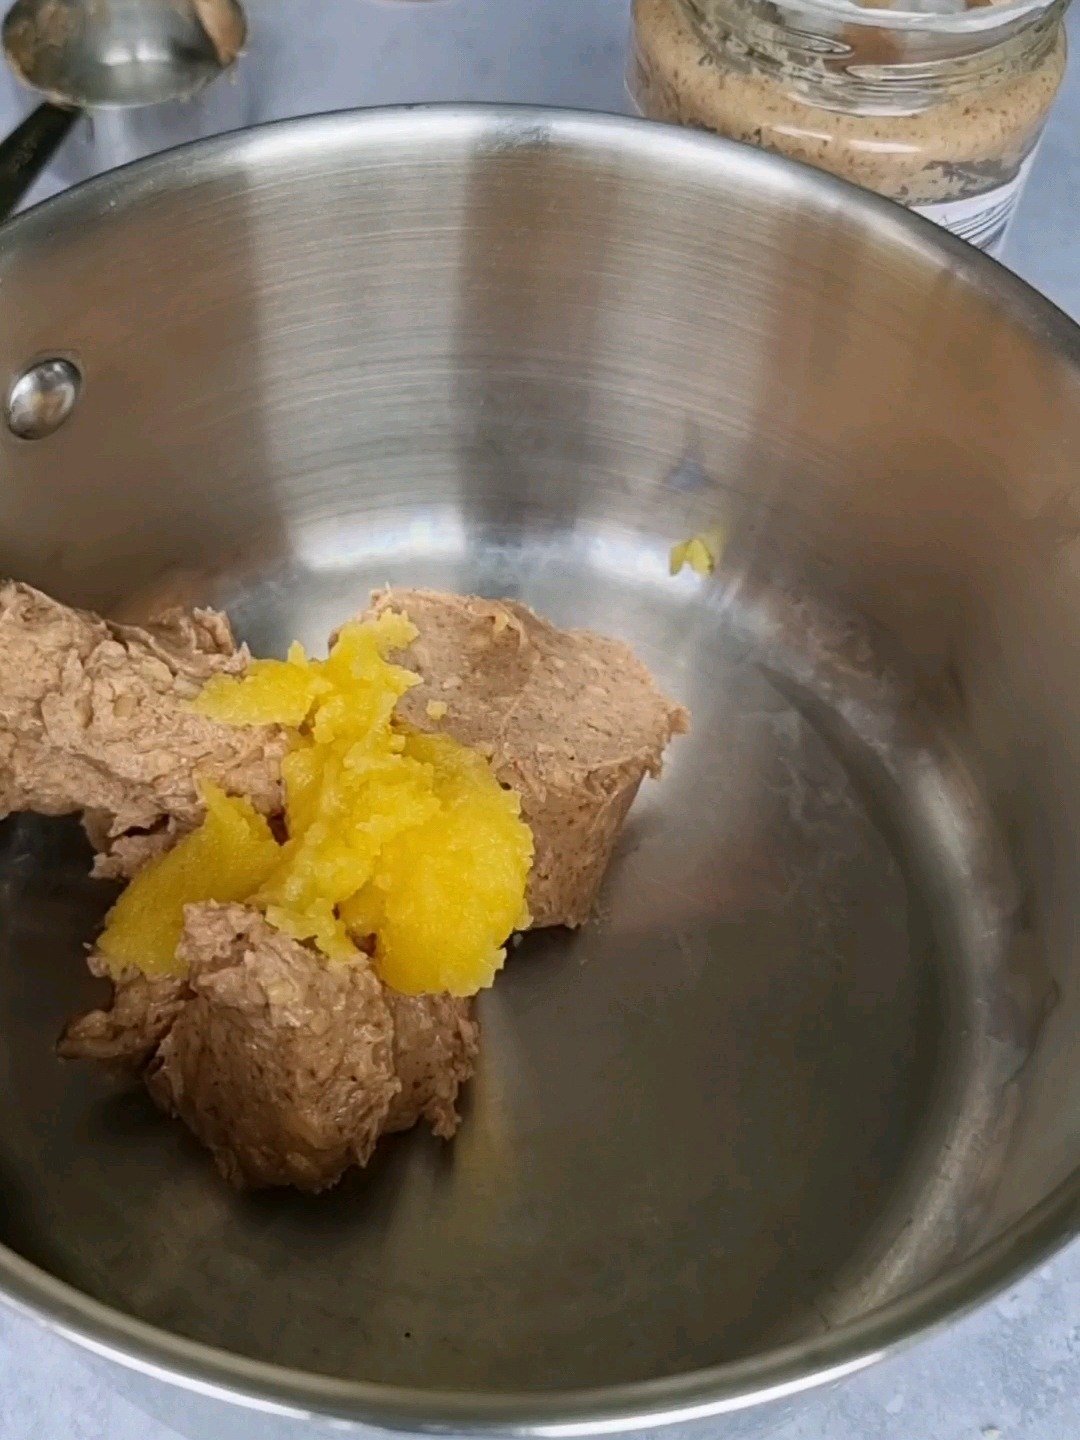 Melting the peanut butter with ghee